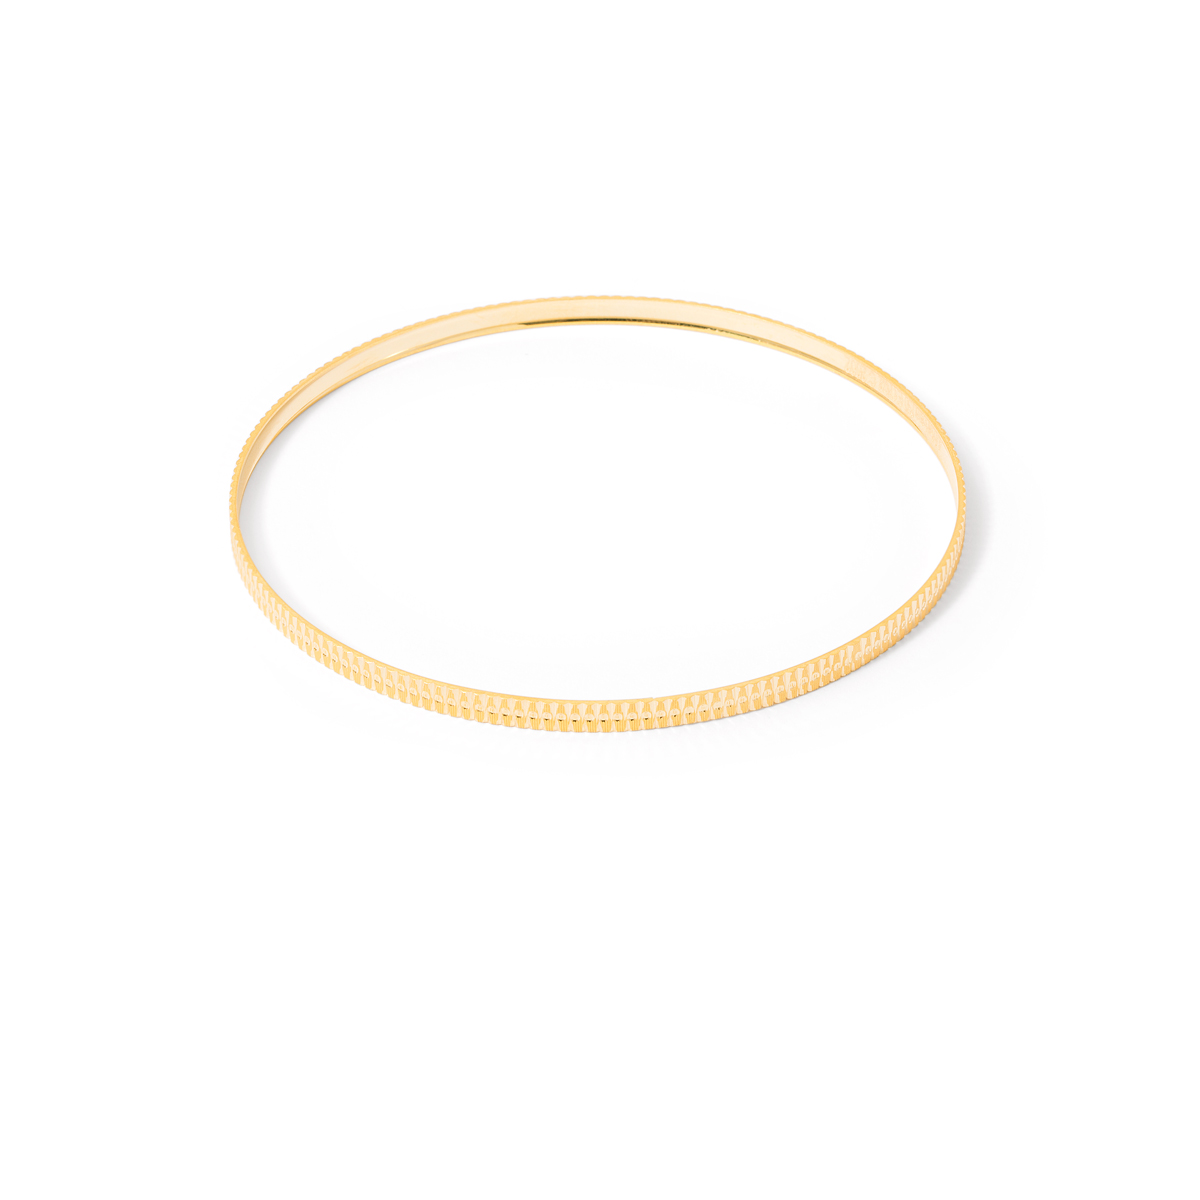 Grooved gold bangle g